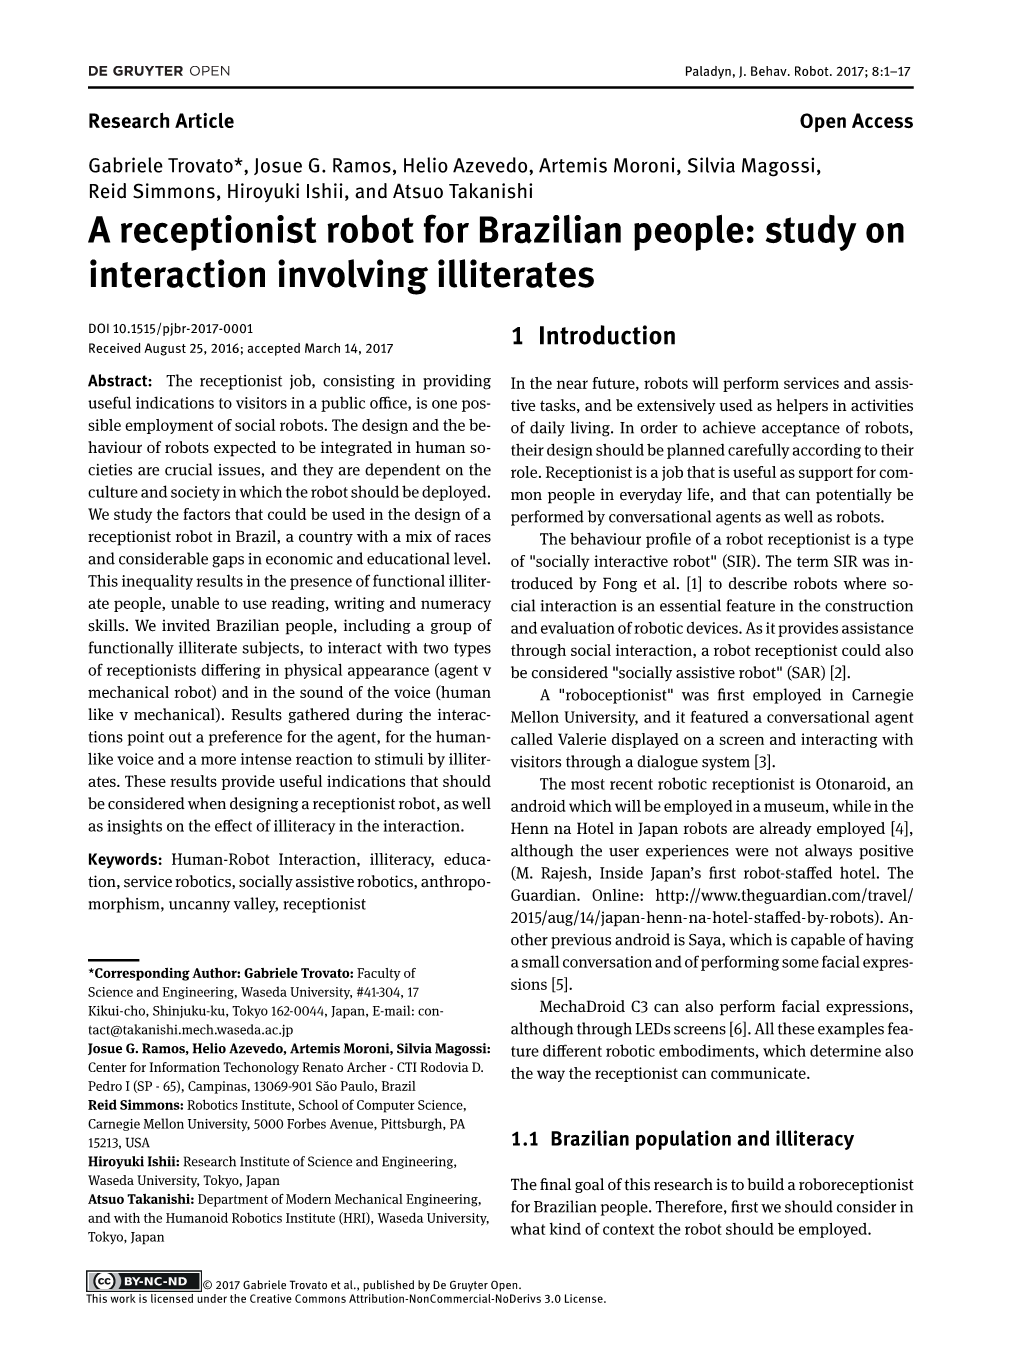 A Receptionist Robot for Brazilian People: Study on Interaction Involving Illiterates